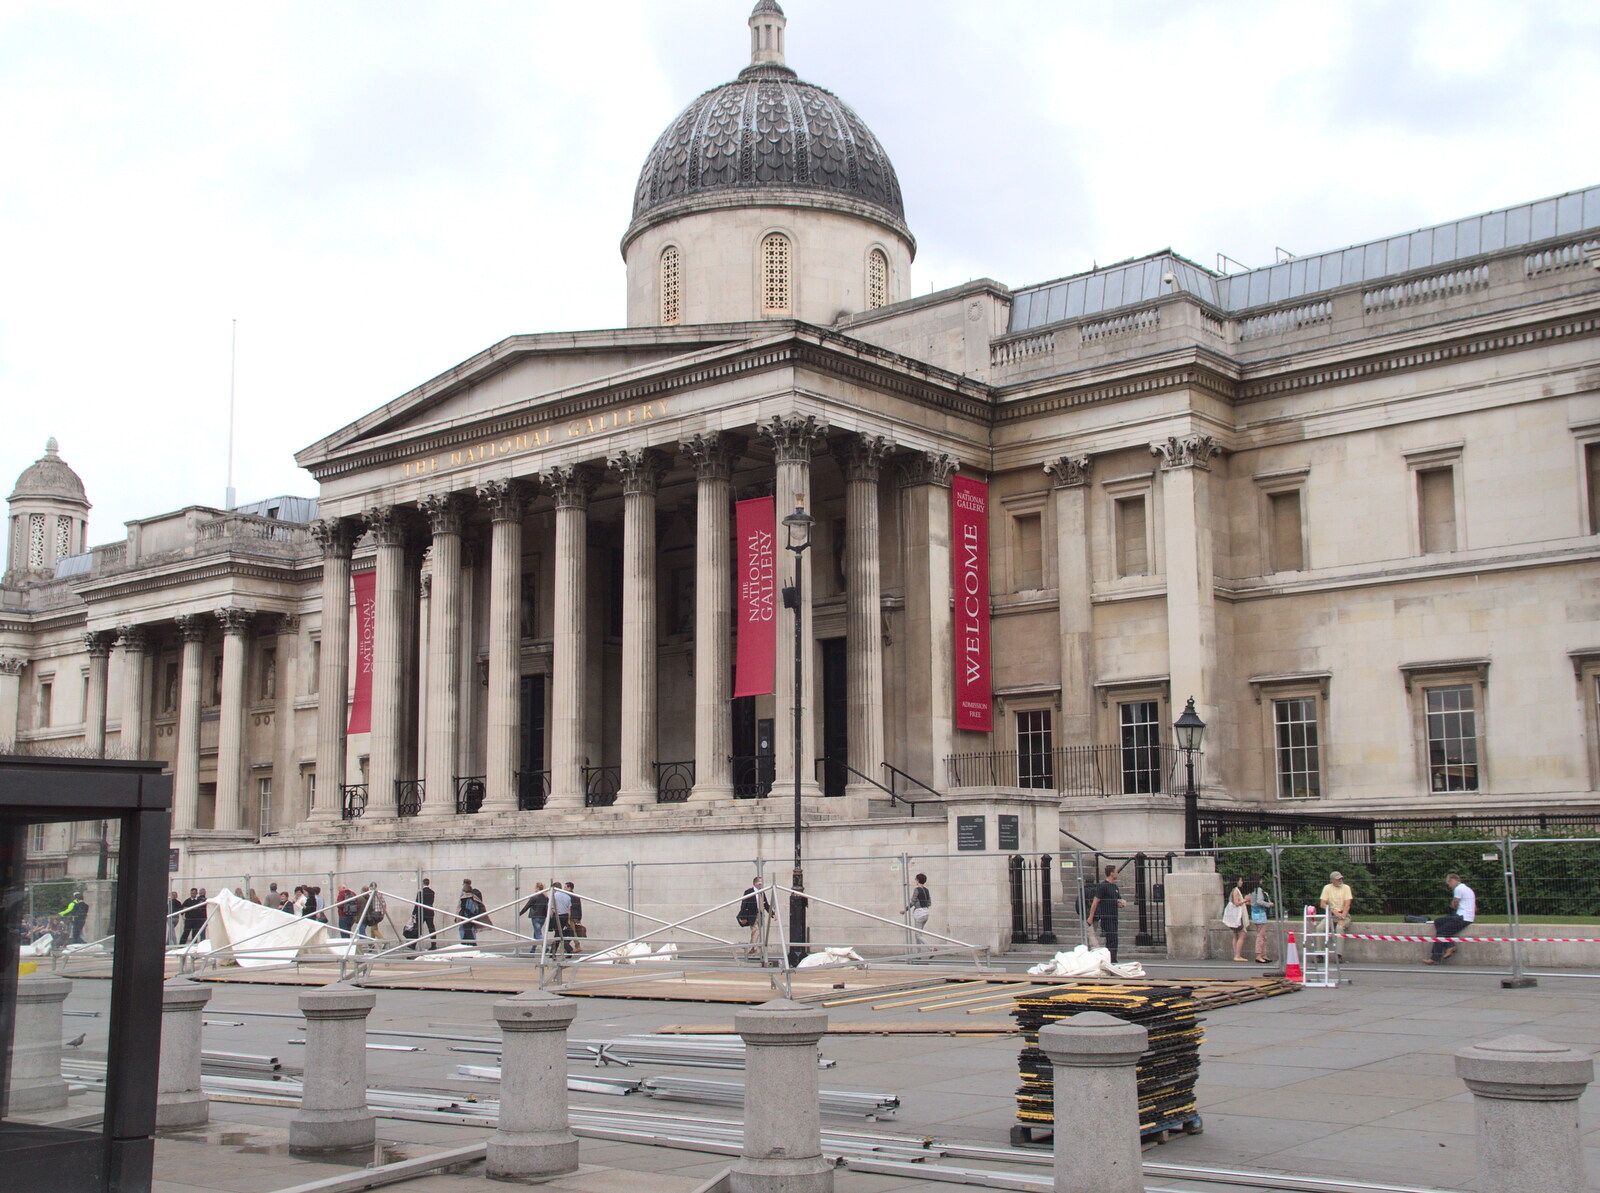 The National Gallery from SwiftKey Innovation Days, The Haymarket, London - 27th June 2014